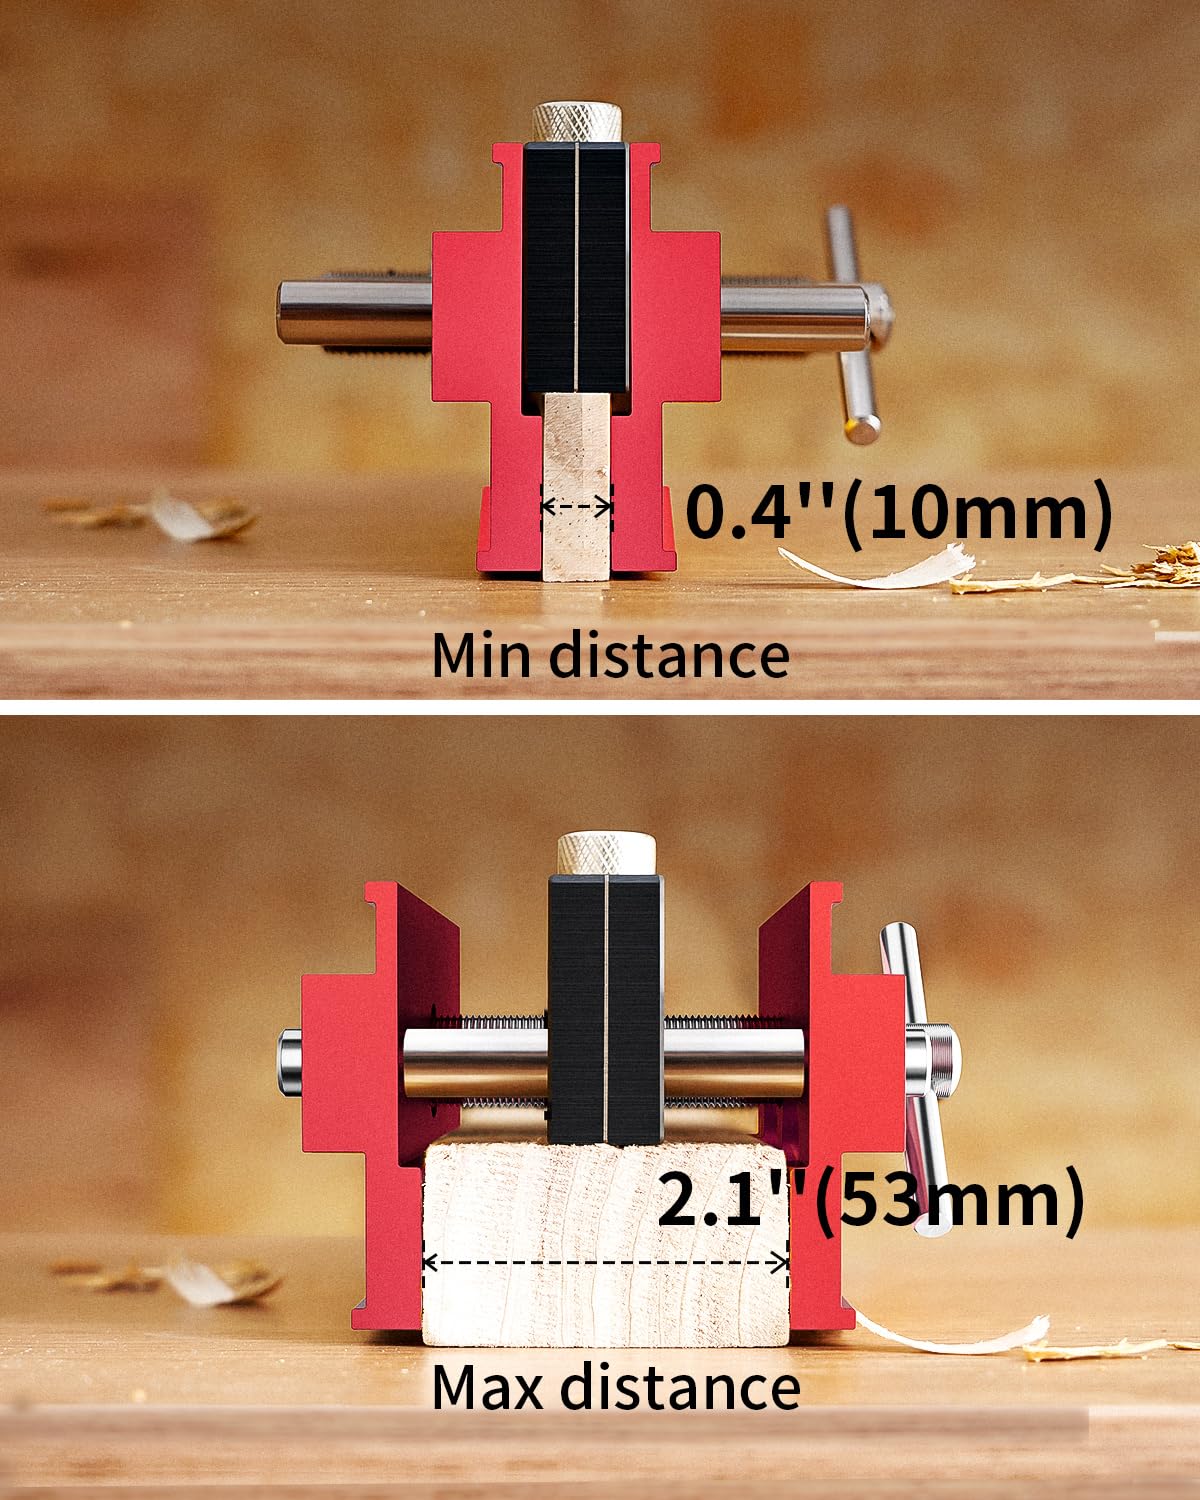 DAYDOOR Self Centering Doweling Jig, Adjustable Width Dowel Jig for Straight Holes, Biscuit Joiner Set with 6 Bushings and 3 Drill Bits(Red)